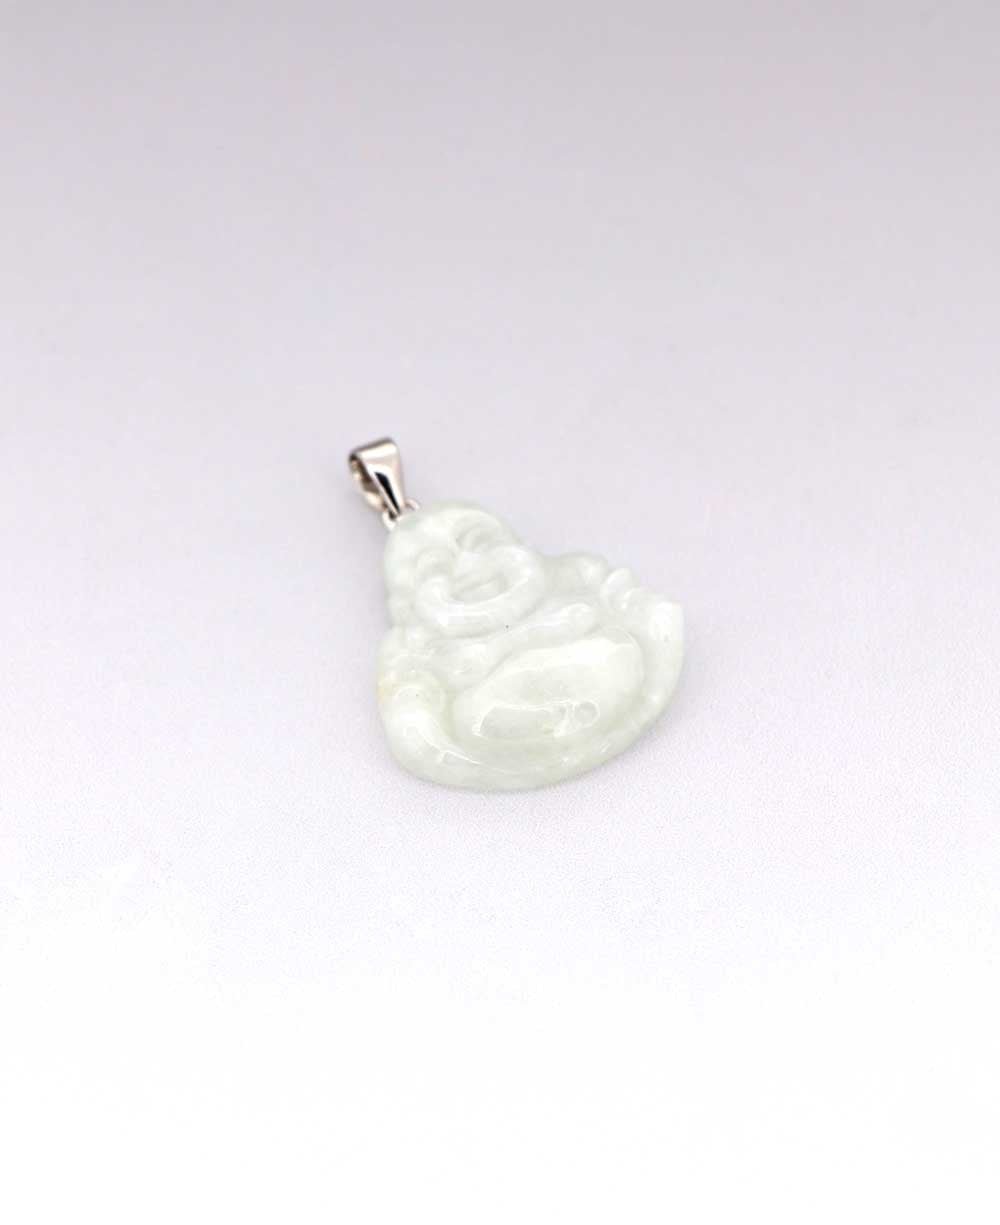 Green Jade and Sterling Silver Happy Buddha Pendant - Charms & Pendants